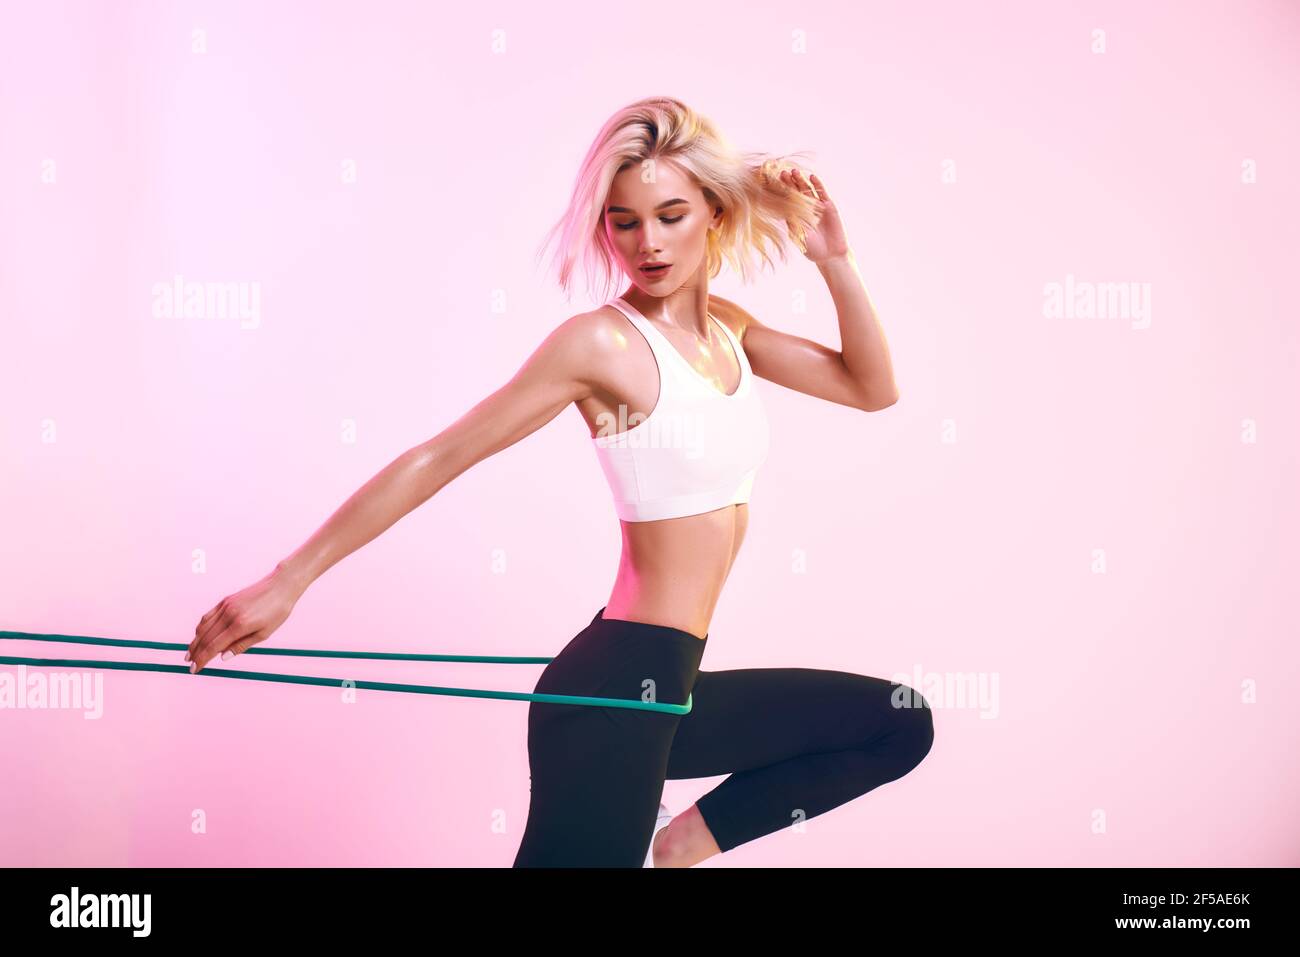 Fitness girl. Sporty beautiful woman in white top and black leggings exercising with resistance band while standing against pink background in studio Stock Photo